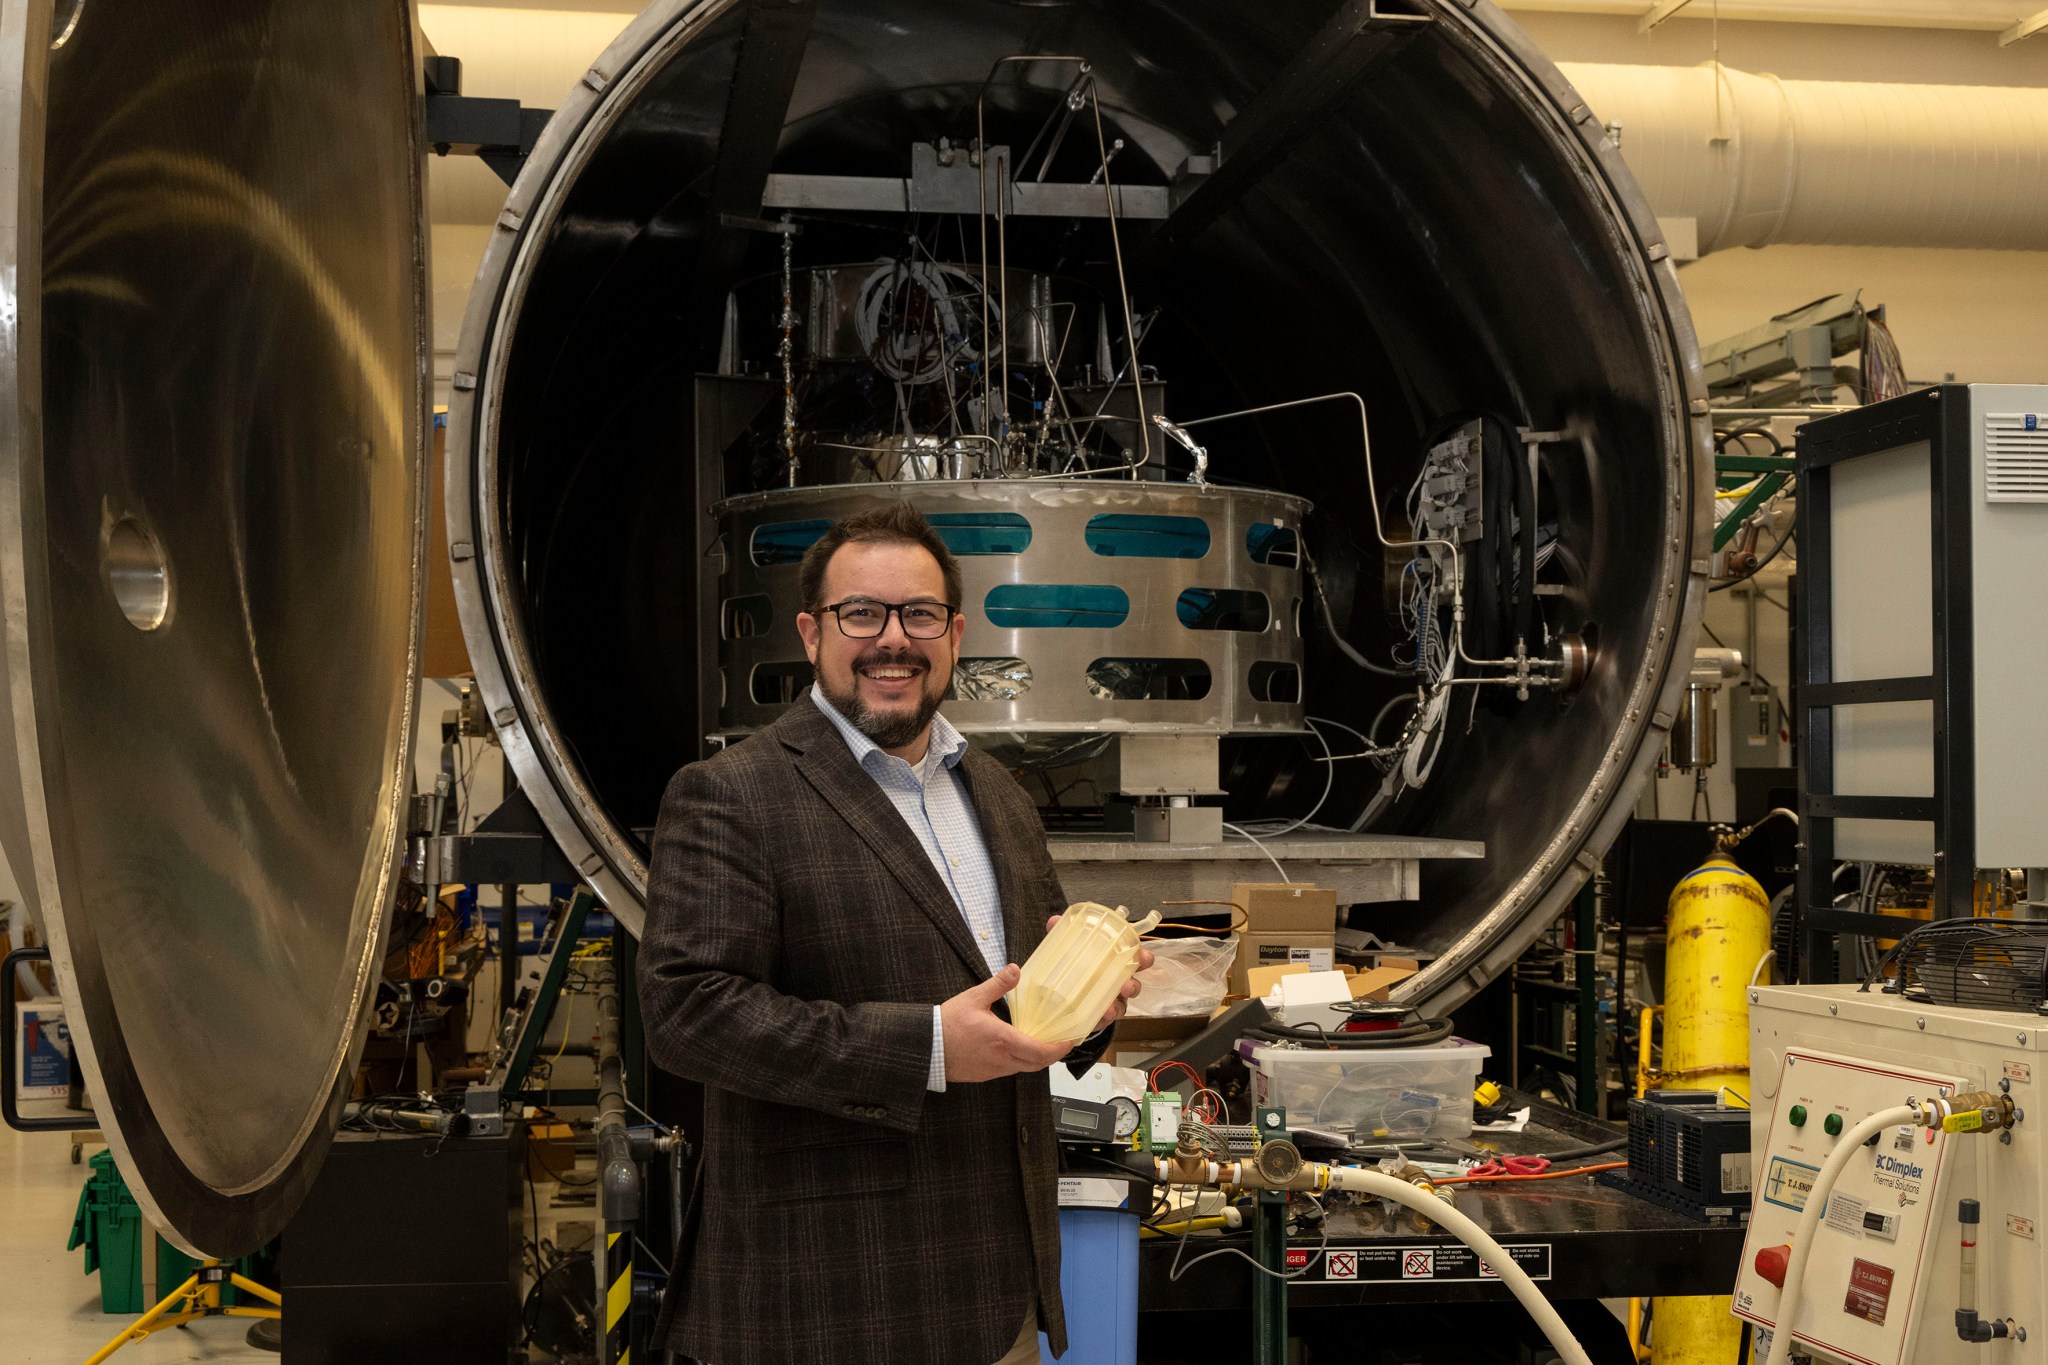 Jason Adam, manager for the CFM Portfolio Project at NASA’s Marshall Space Flight Center, holds a full-size resin model of a Thermodynamic Vent System Injector while standing in front of an Exploration Systems Test Facility within the CFM Laboratory in Building 4205.